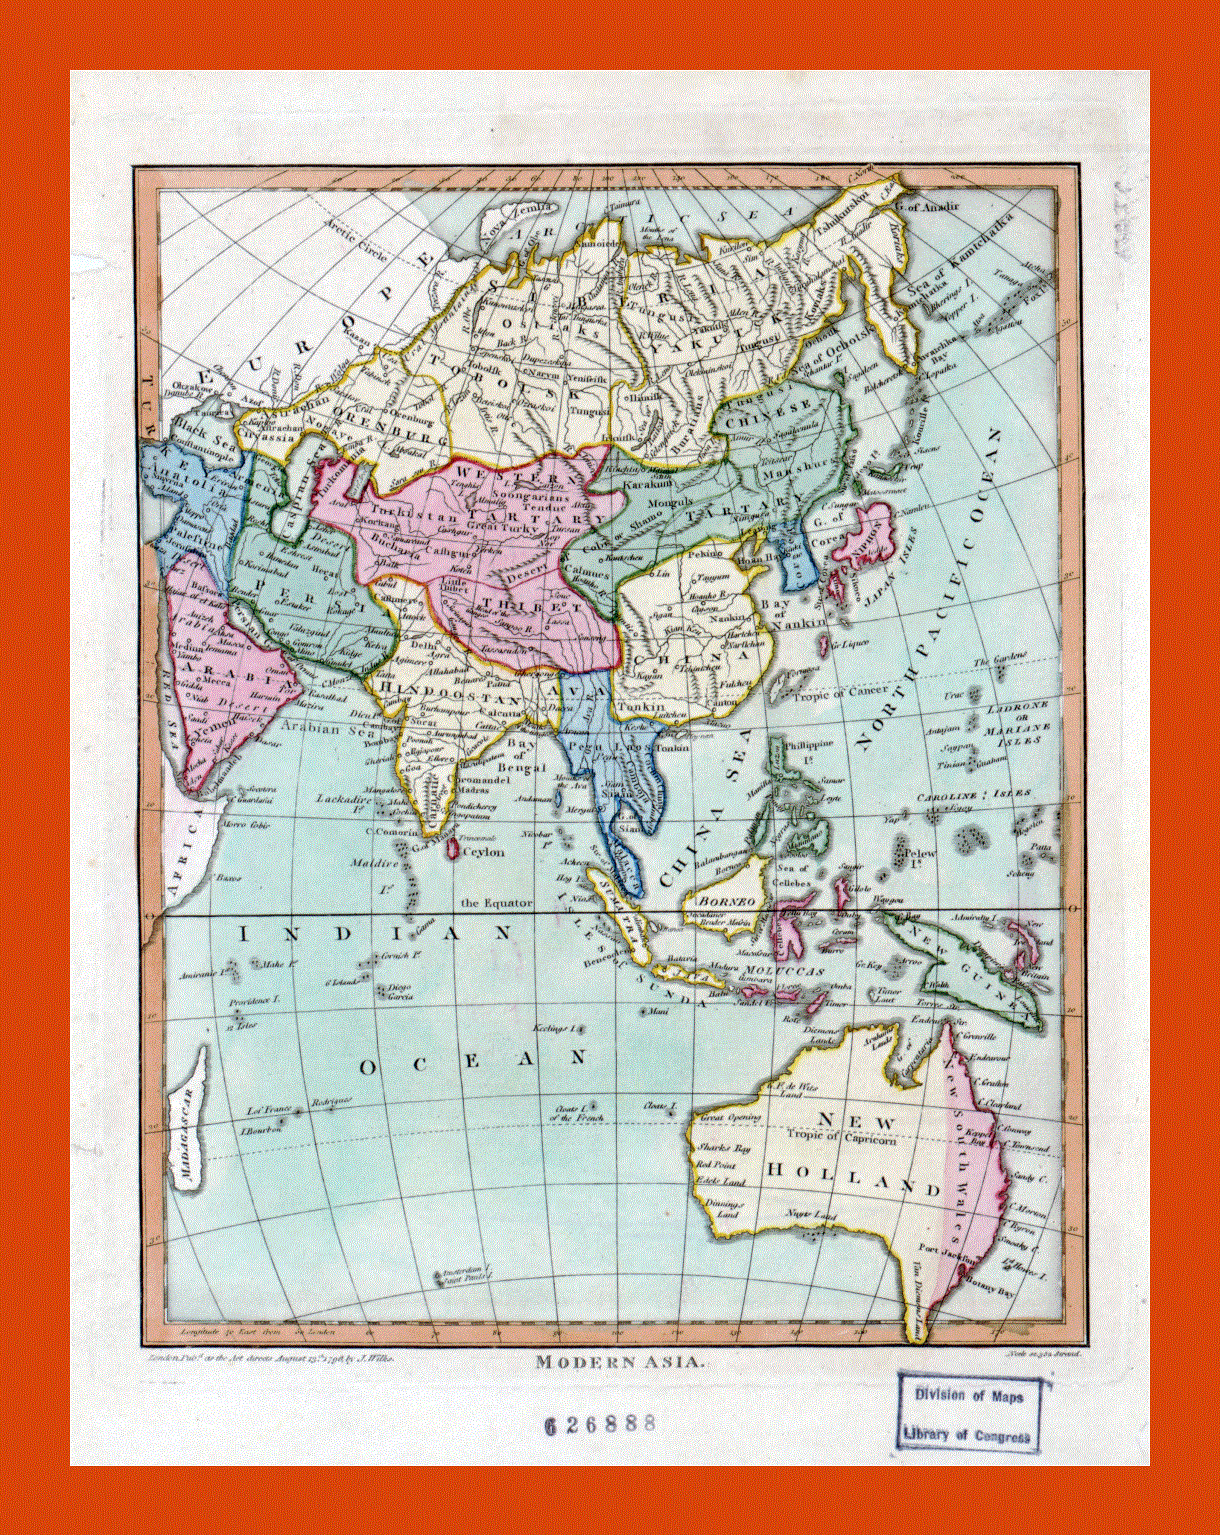 Old map of modern Asia - 1796